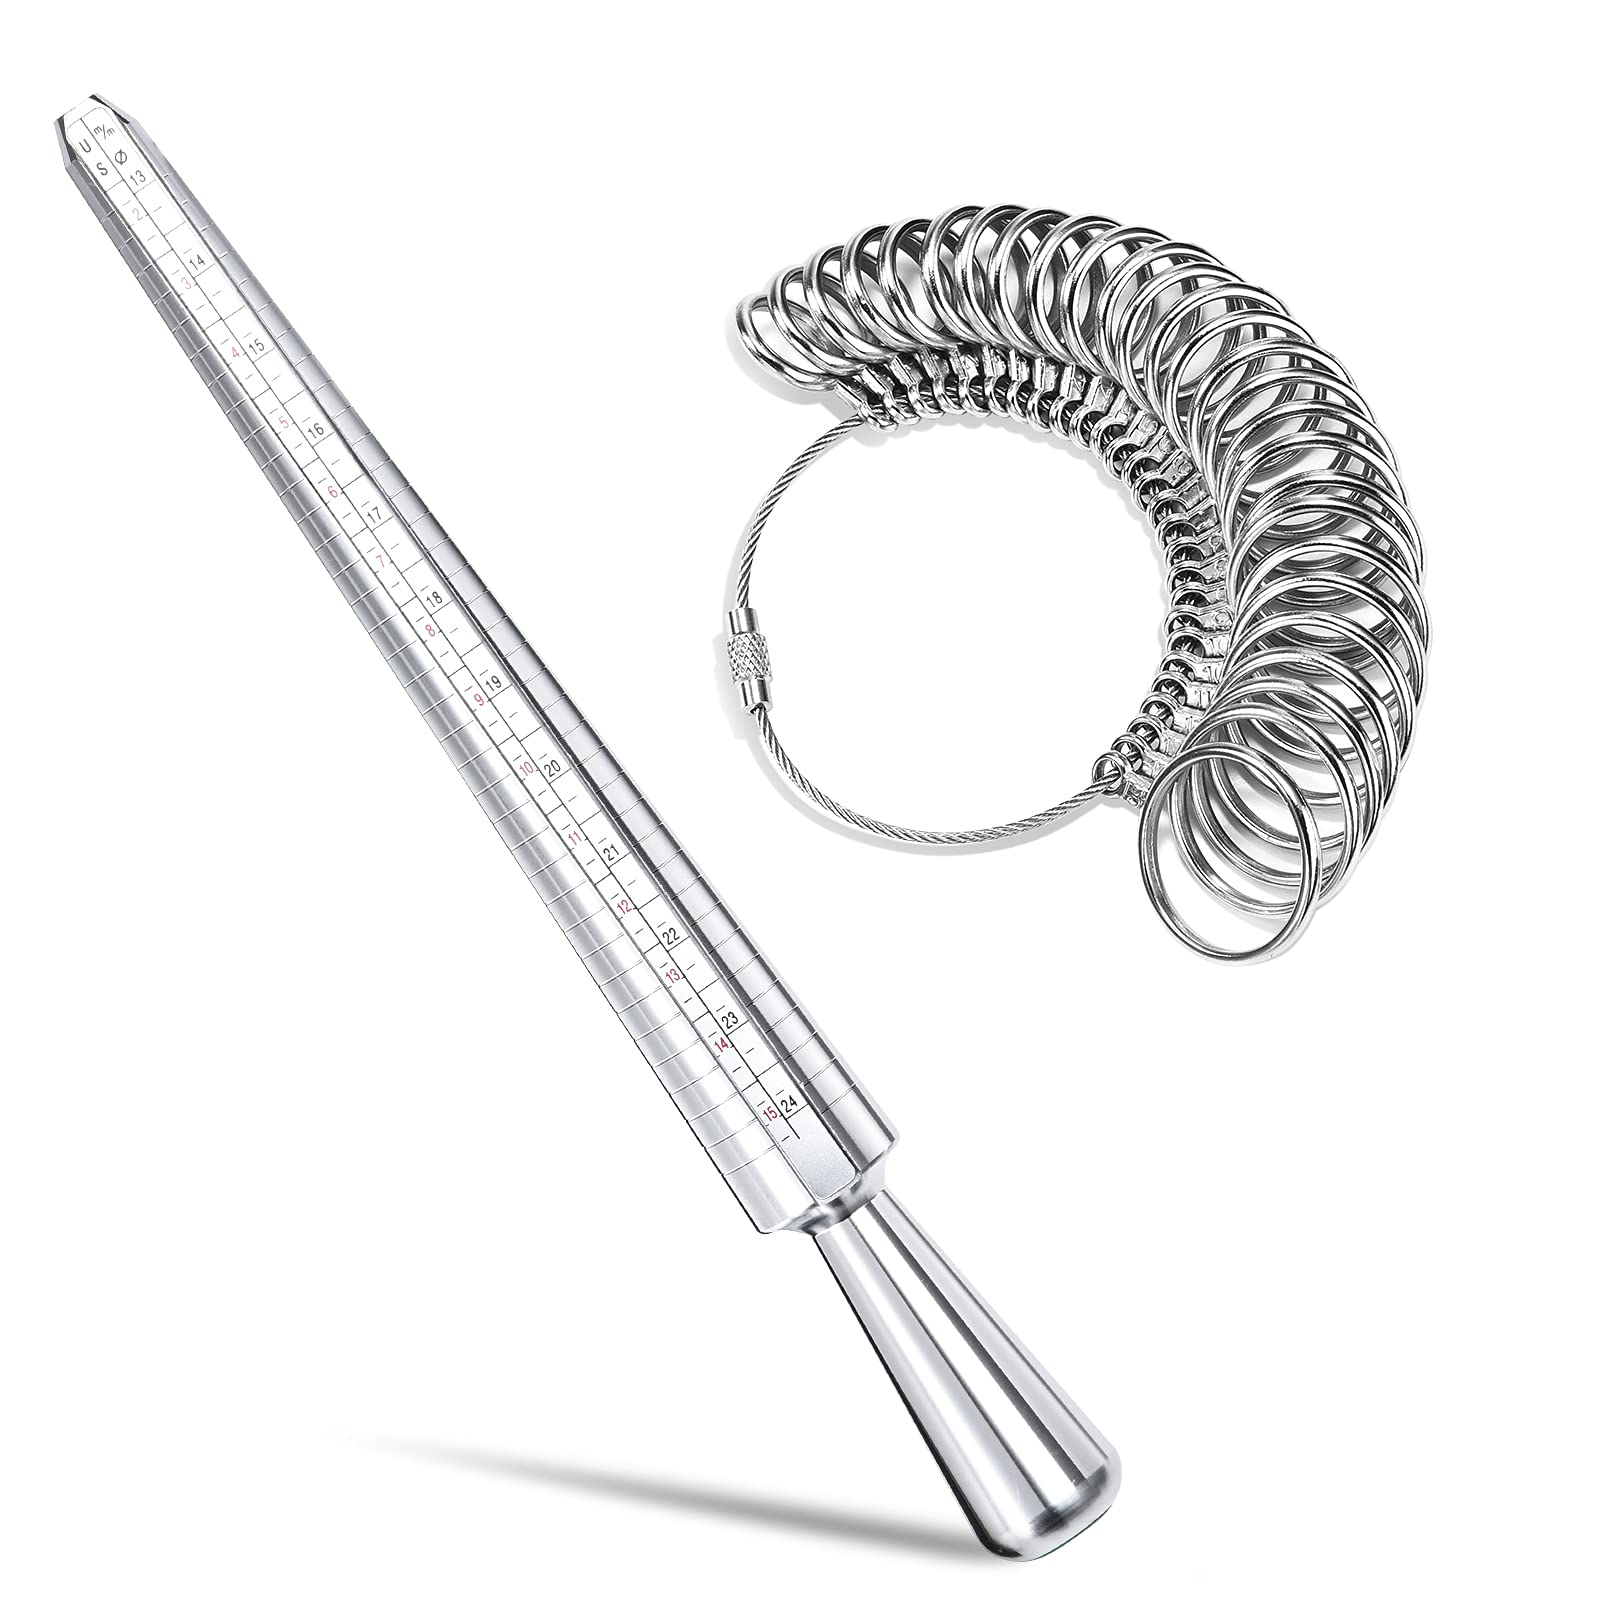  6pcs Metal Ring Sizer Measuring Tool Set, UK US EU Ring Mandrel  for Ring Making and Finger Measuring, Quickly Find The Right Size : Arts,  Crafts & Sewing